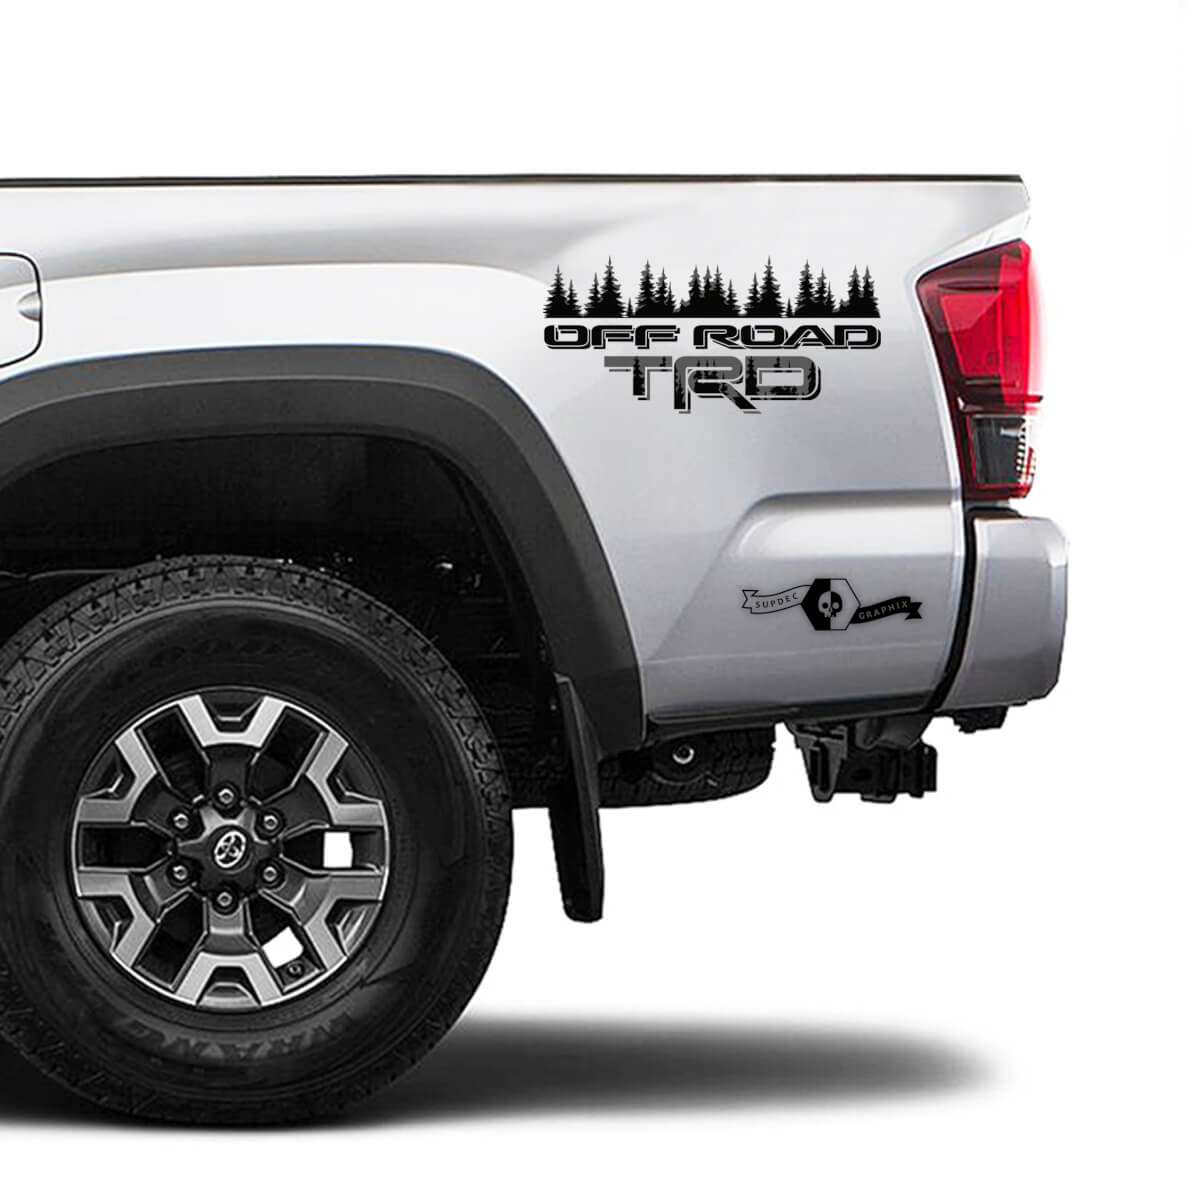 TRD Off Road TOYOTA Forest 2 Colour Mountain Decals Stickers for Tacoma Tundra 4Runner Hilux side